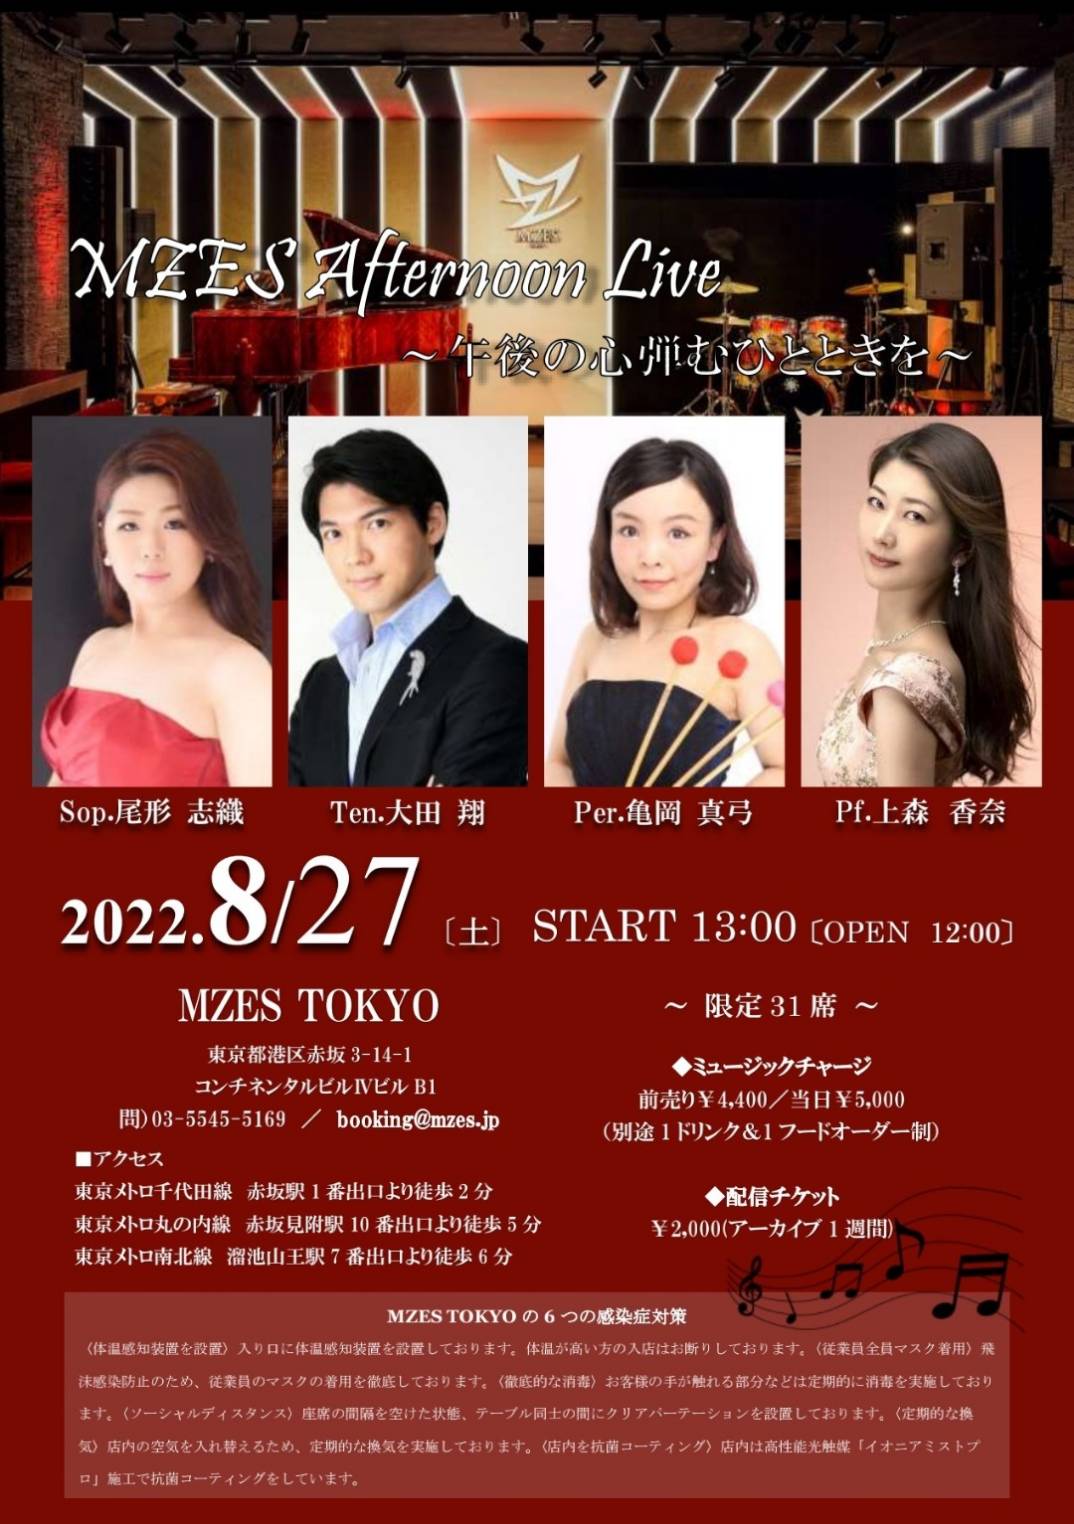 MZES Afternoon Live ～午後の心弾むひとときを～